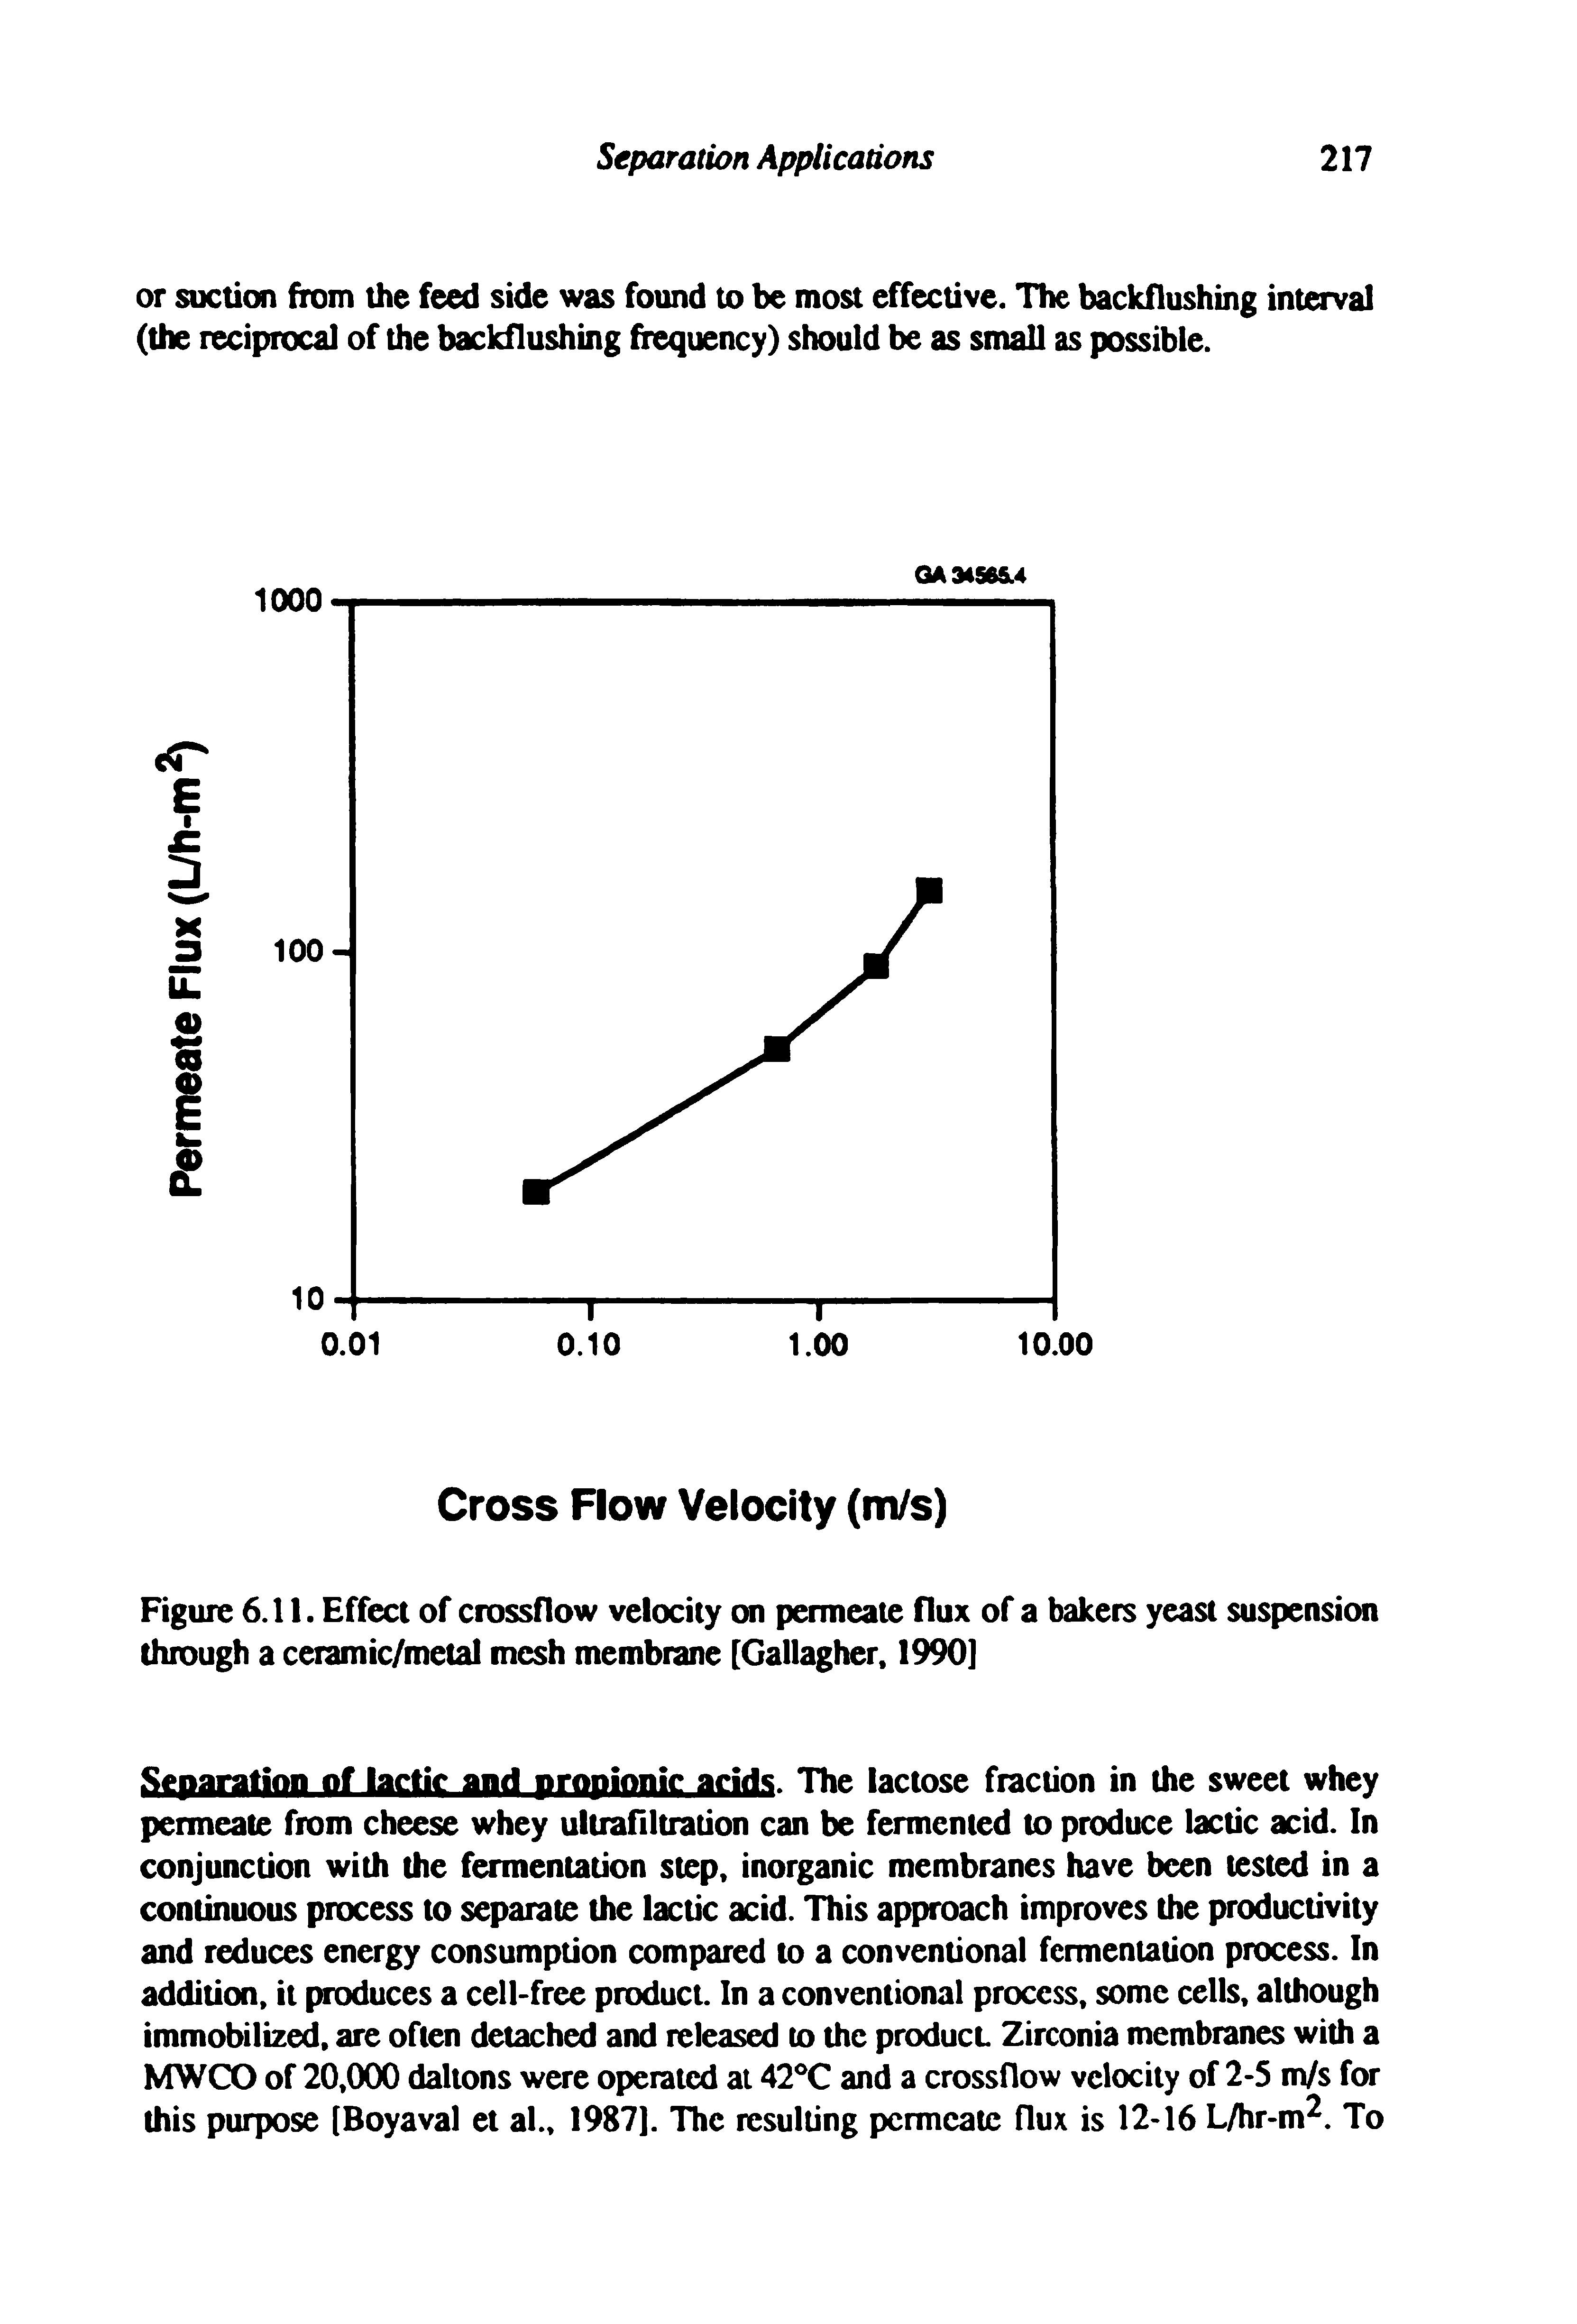 Figure 6.11. Effect of crossflow velocity on permeate flux of a bakers yeast suspension through a ceramic/metal mesh membrane [Gallagher, 1990]...